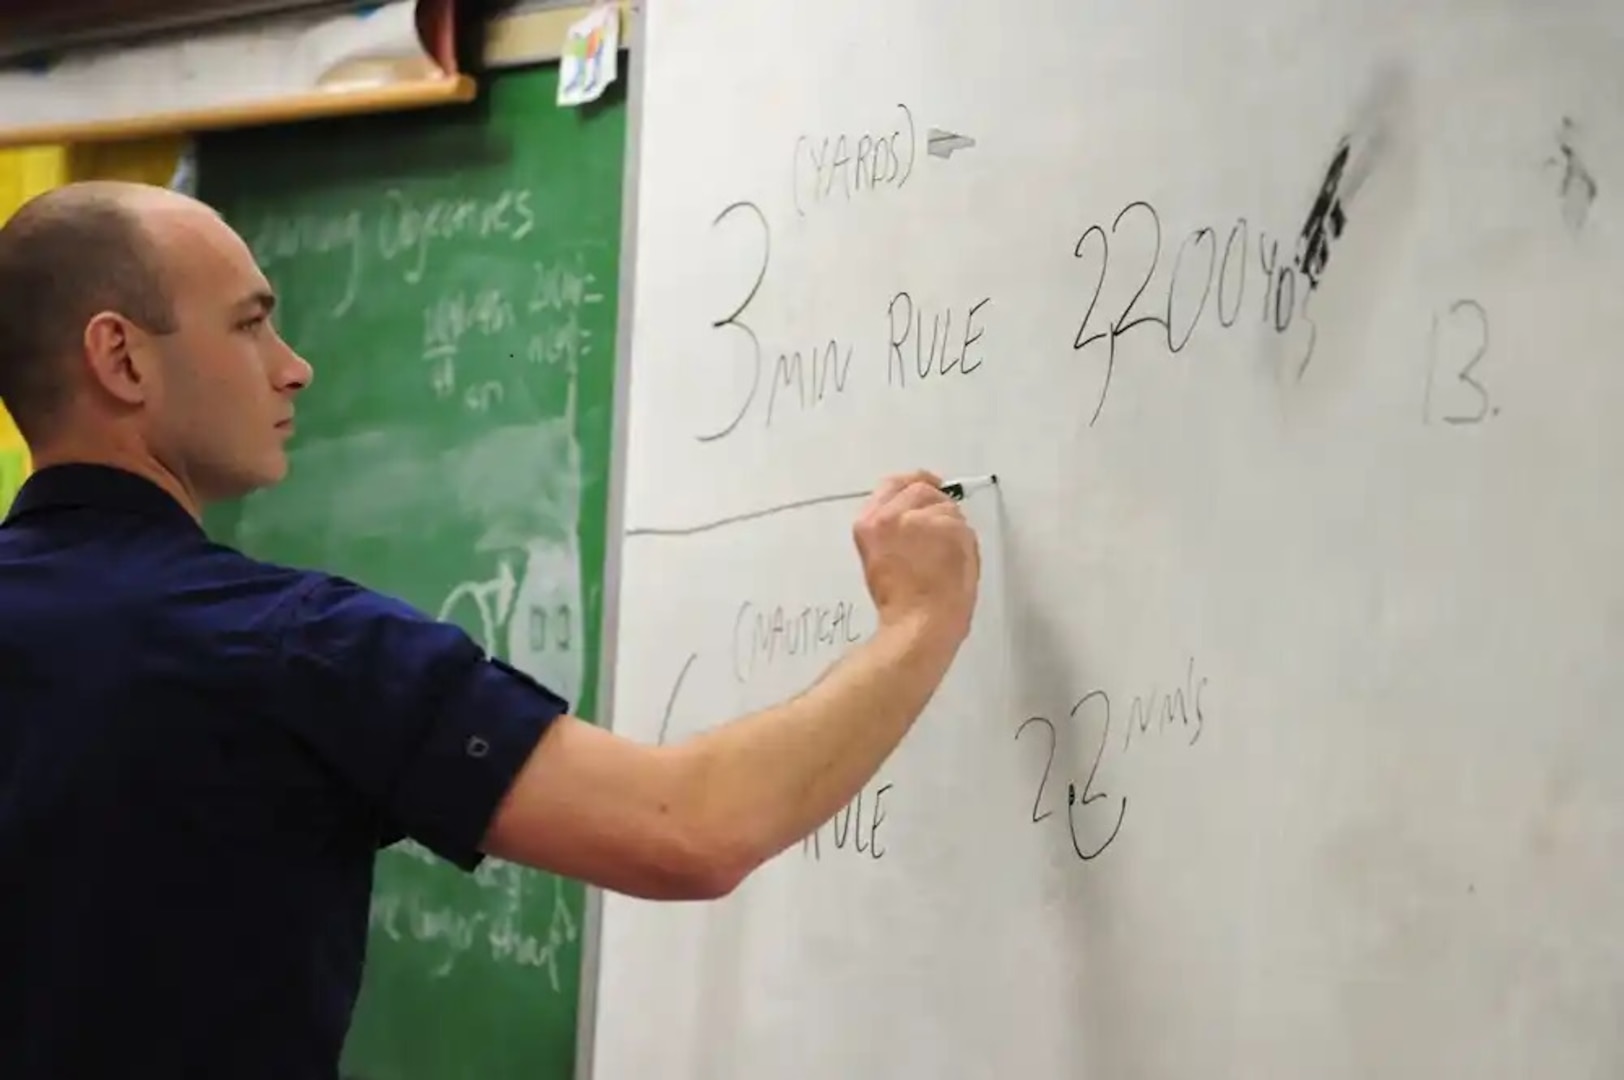 Petty Officer 2nd Class Brett Rielly, a boatswain's mate stationed at Coast Guard Station Juneau, Alaska, writes out an equation used to calculate distance in Jody Levernier's sixth-grade math class at Dzantik'i Heeni Middle School April 19, 2013. This event marked the fifth consecutive year that Levernier invited Coast Guard personnel to her class to show students how practical math is in the real world. U.S. Coast Guard photo by Petty Officer 3rd Class Grant DeVuyst.